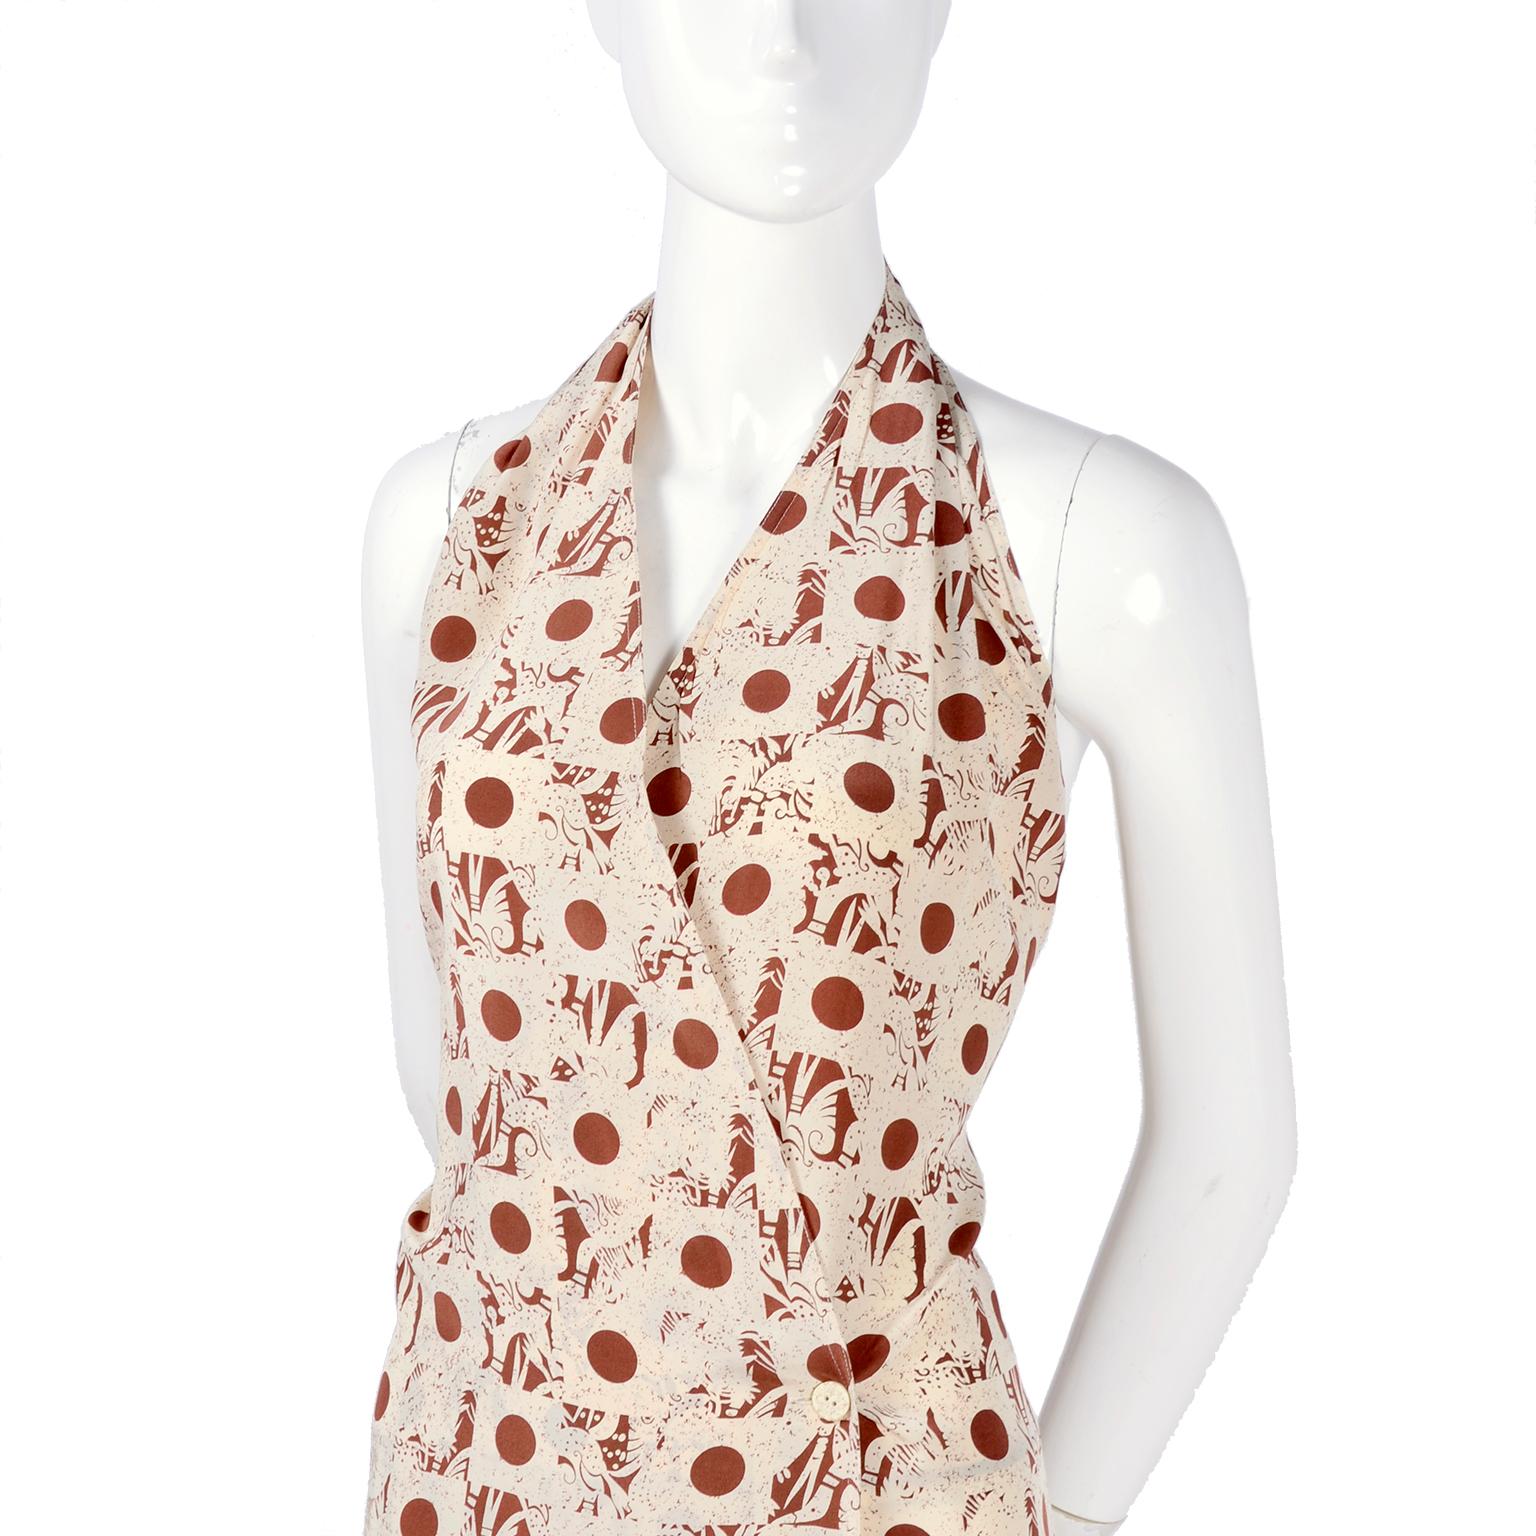 This fabulous, very contemporary vintage Albert Nipon halter dress is in an abstract brown and cream printed silk fabric and comes with a silk open front, loose fitting blouse style jacket for cooler nights.  The dress is loose fitting, has side